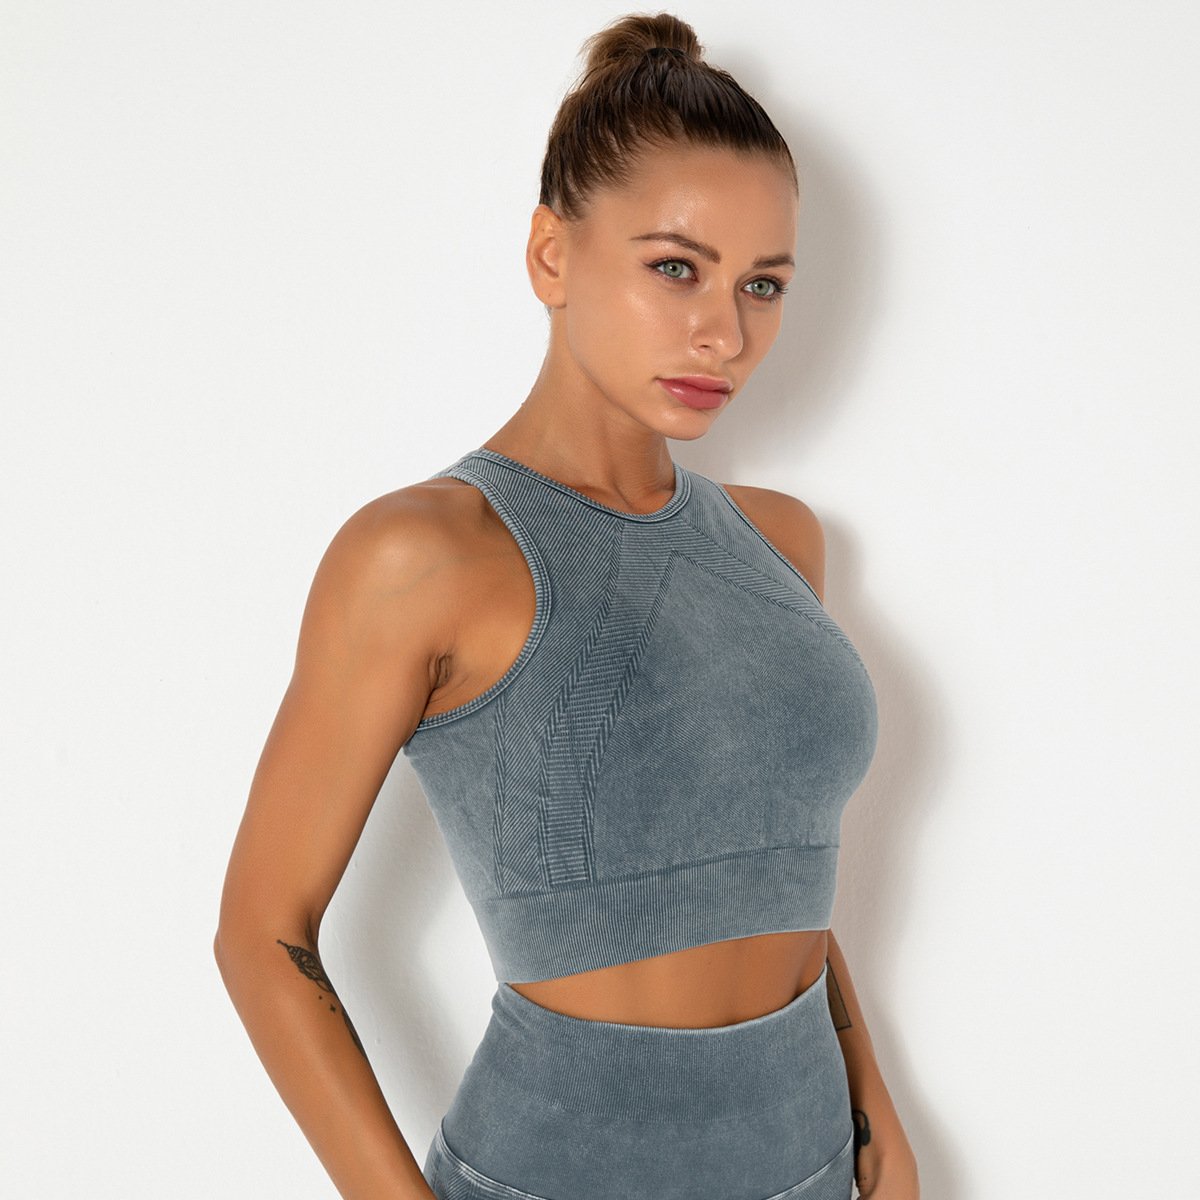 New Fabric Nylon Breathable Women Fitness Tops Bra Solid Color Gyms Sexy Sports Wear Outdoor Exercise Clothes Women Tank Top